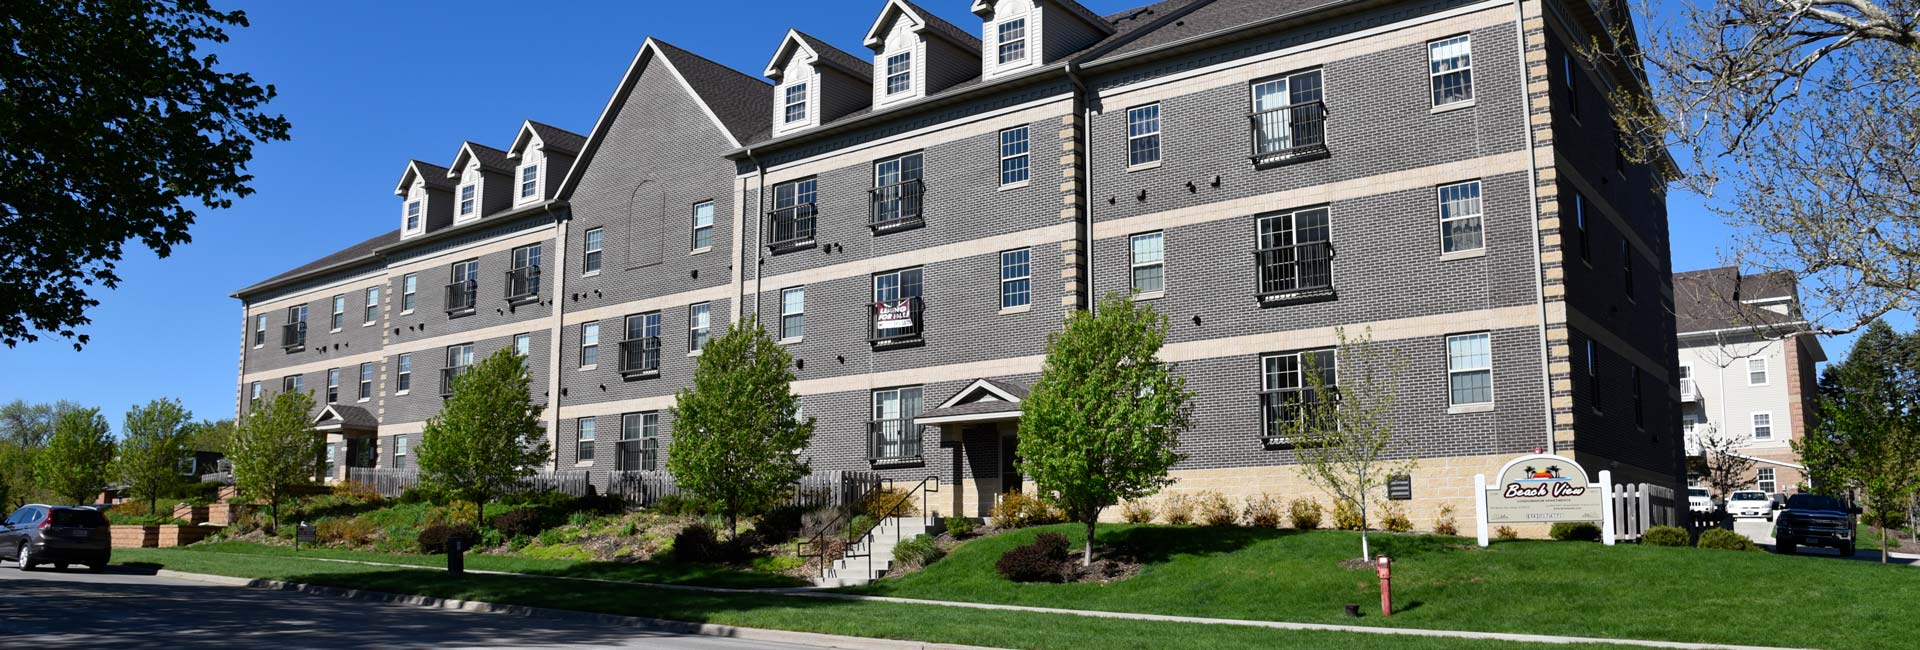 Creatice Ames Apartments Near Iowa State University for Large Space